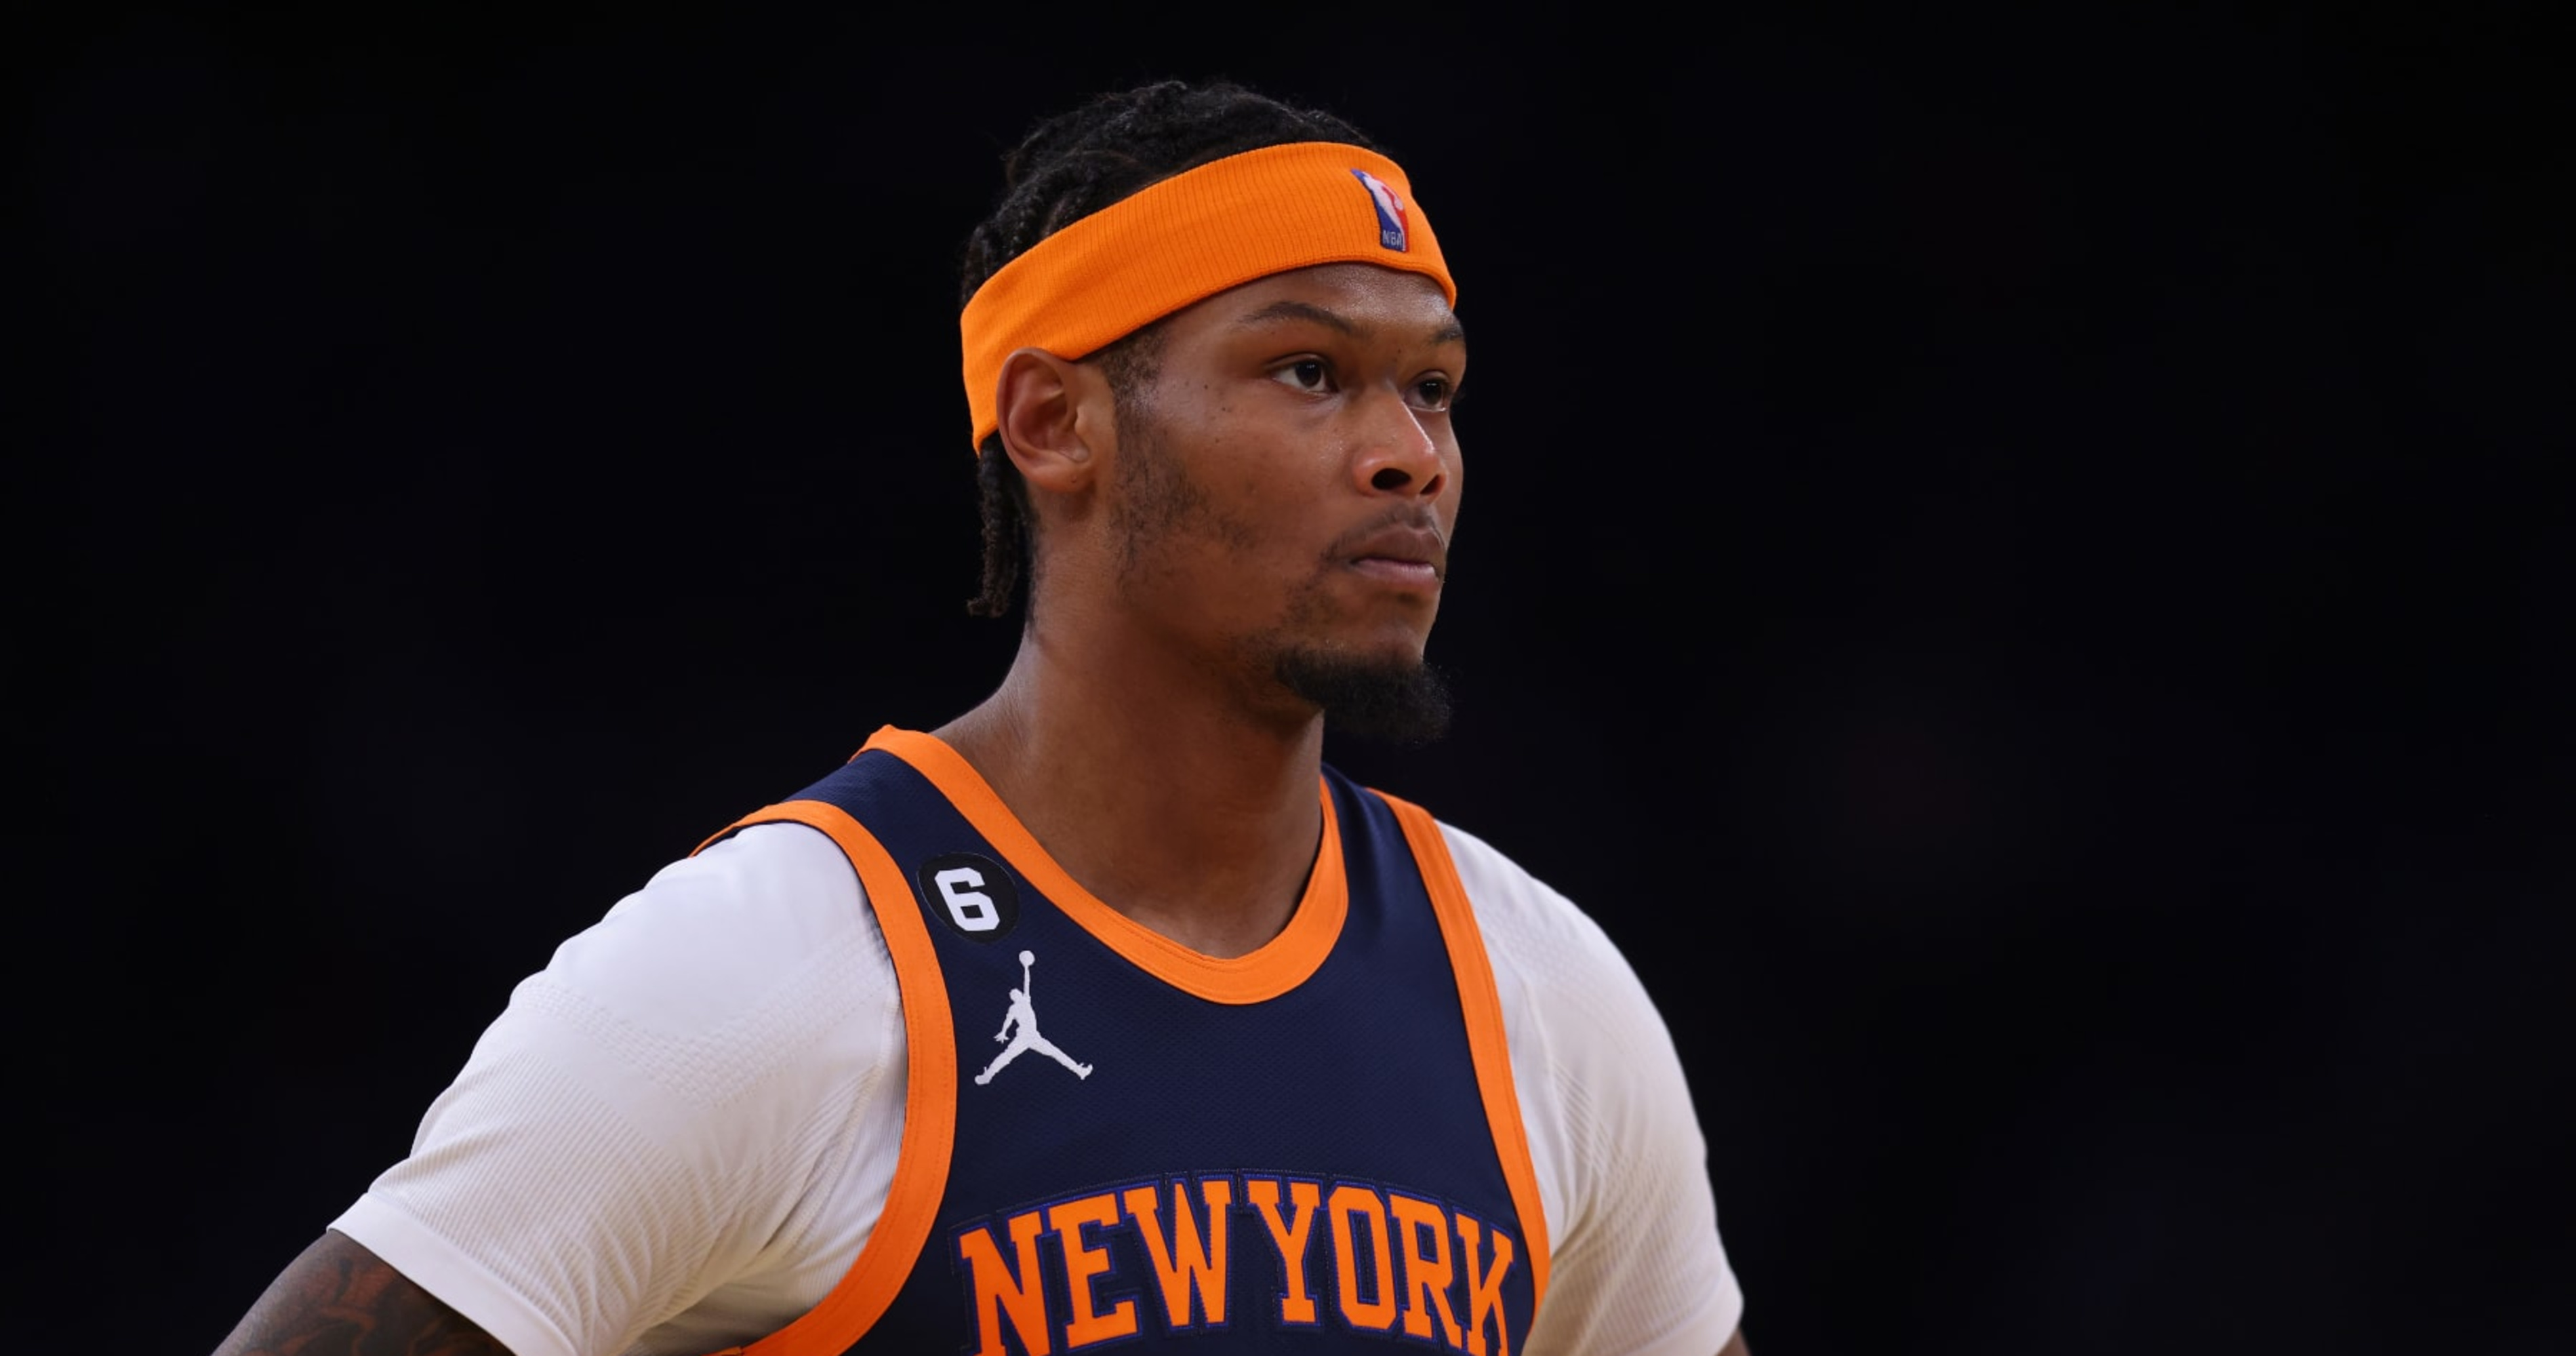 The Knicks trade Cam Reddish to the Indiana Pacers in this trade proposal